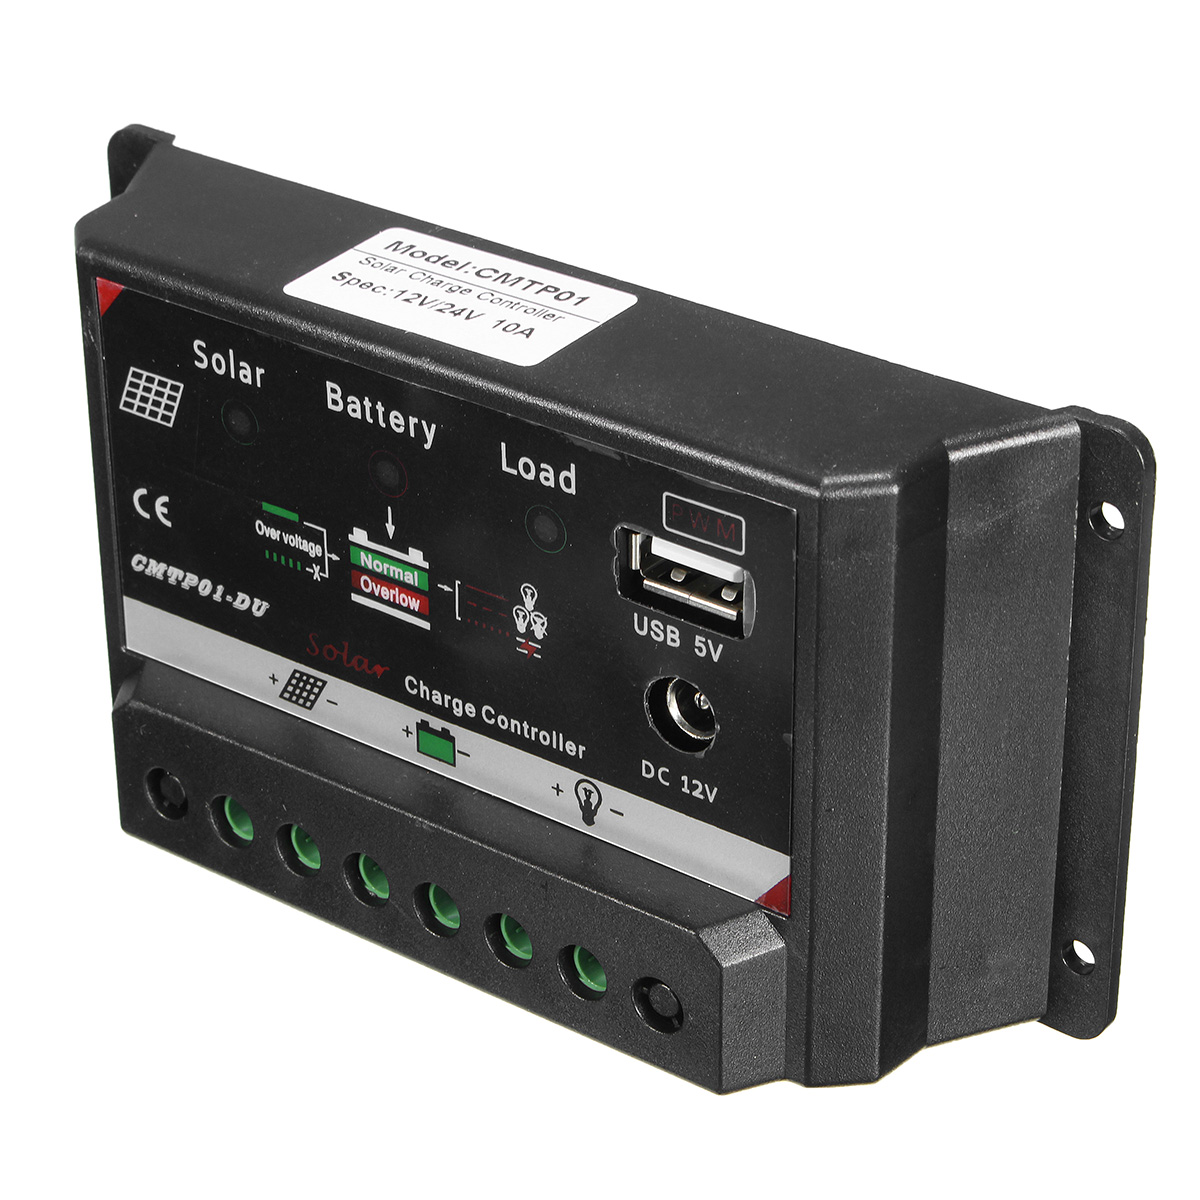 1020A-LED-Auto-PWM-Solar-Panel-Battery-Regulator-Charge-Controller-DC12V-Output-1089462-6